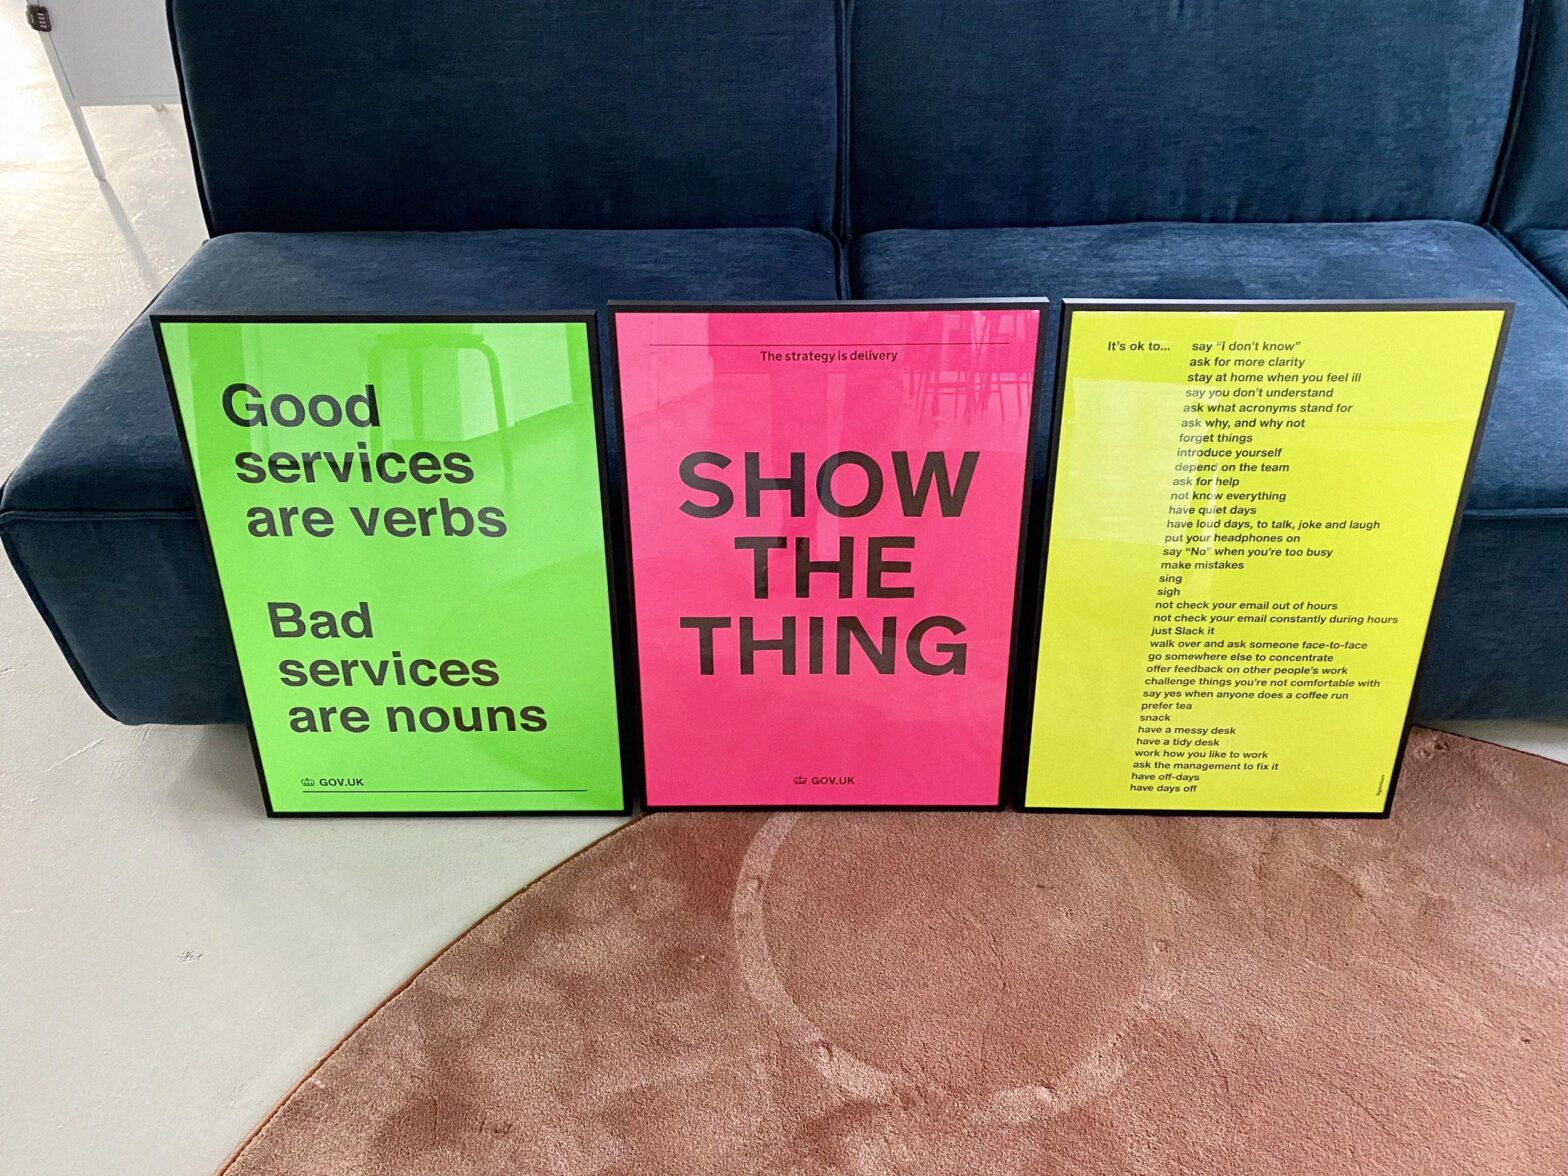 3 framed posters standing in front of a big sofa. 1st poster says: Good services are verbs, bad services are nouns. 2nd poster says: Show the thing. 3rd poster says: It’s ok to – and then lists a long list of things that are ok in the work culture, including OK to say I don’t know, ask for more clarity, ask for help